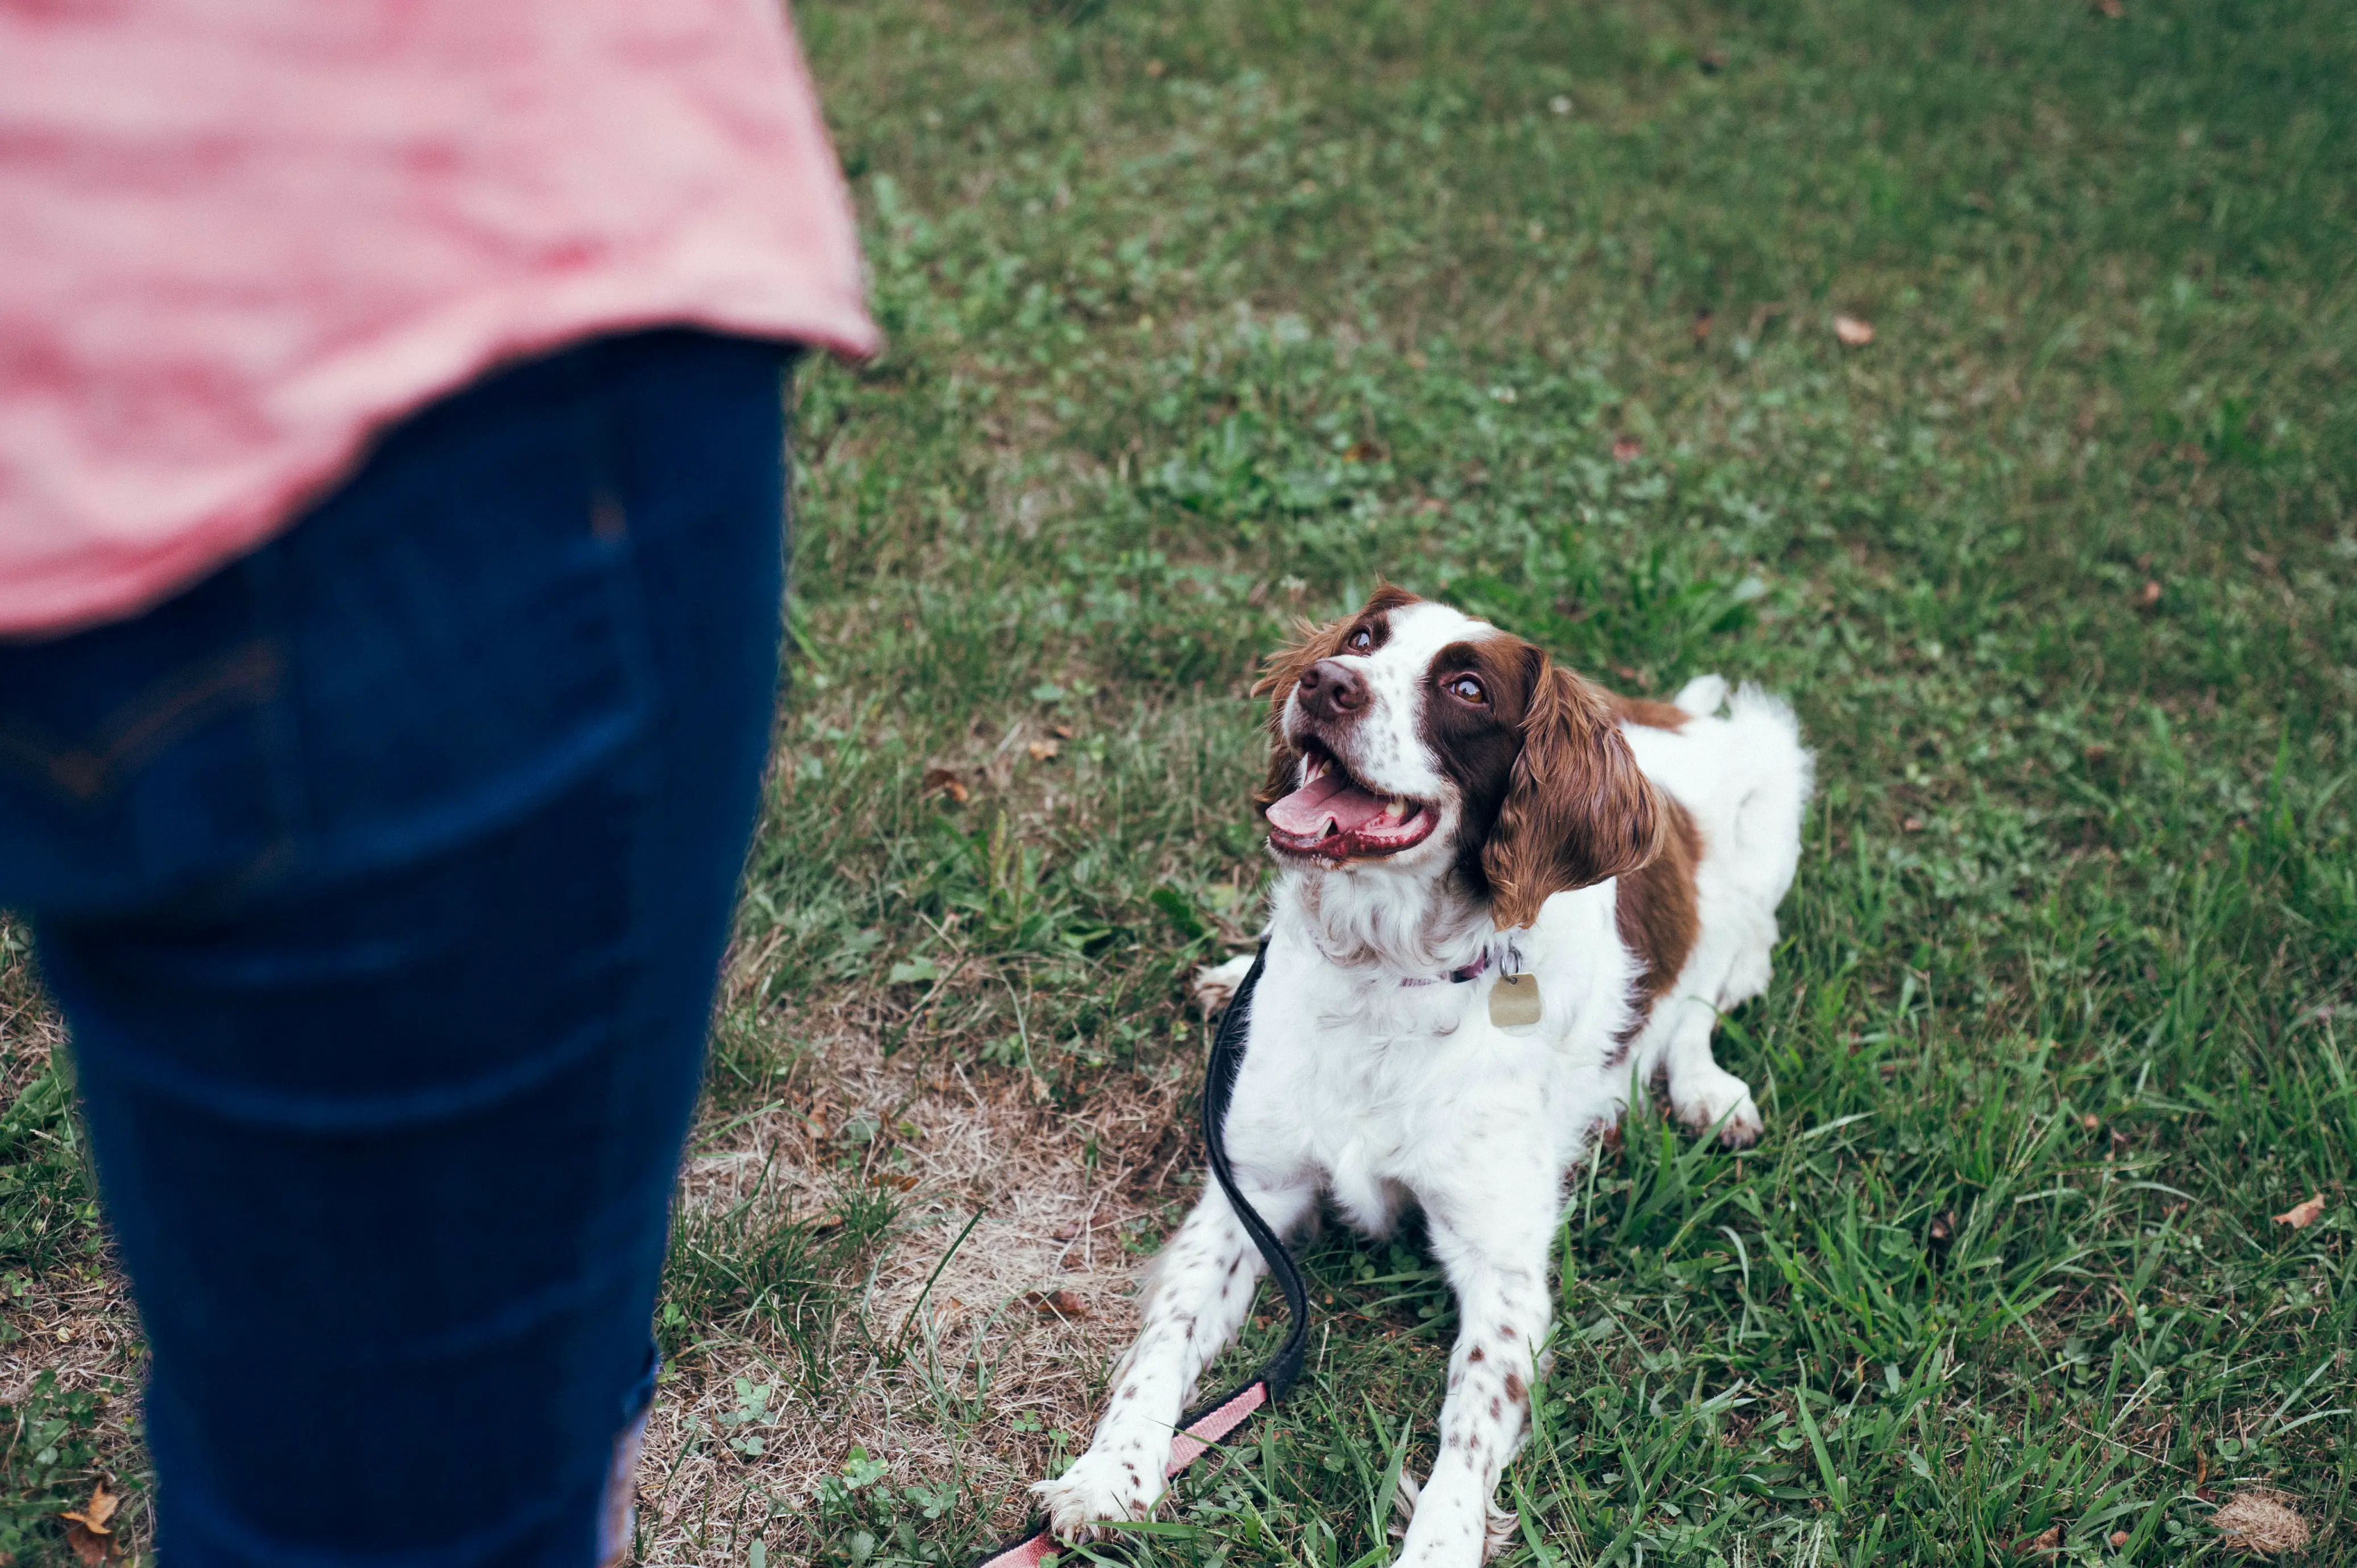 How to Train Your Dog with Positive Reinforcement